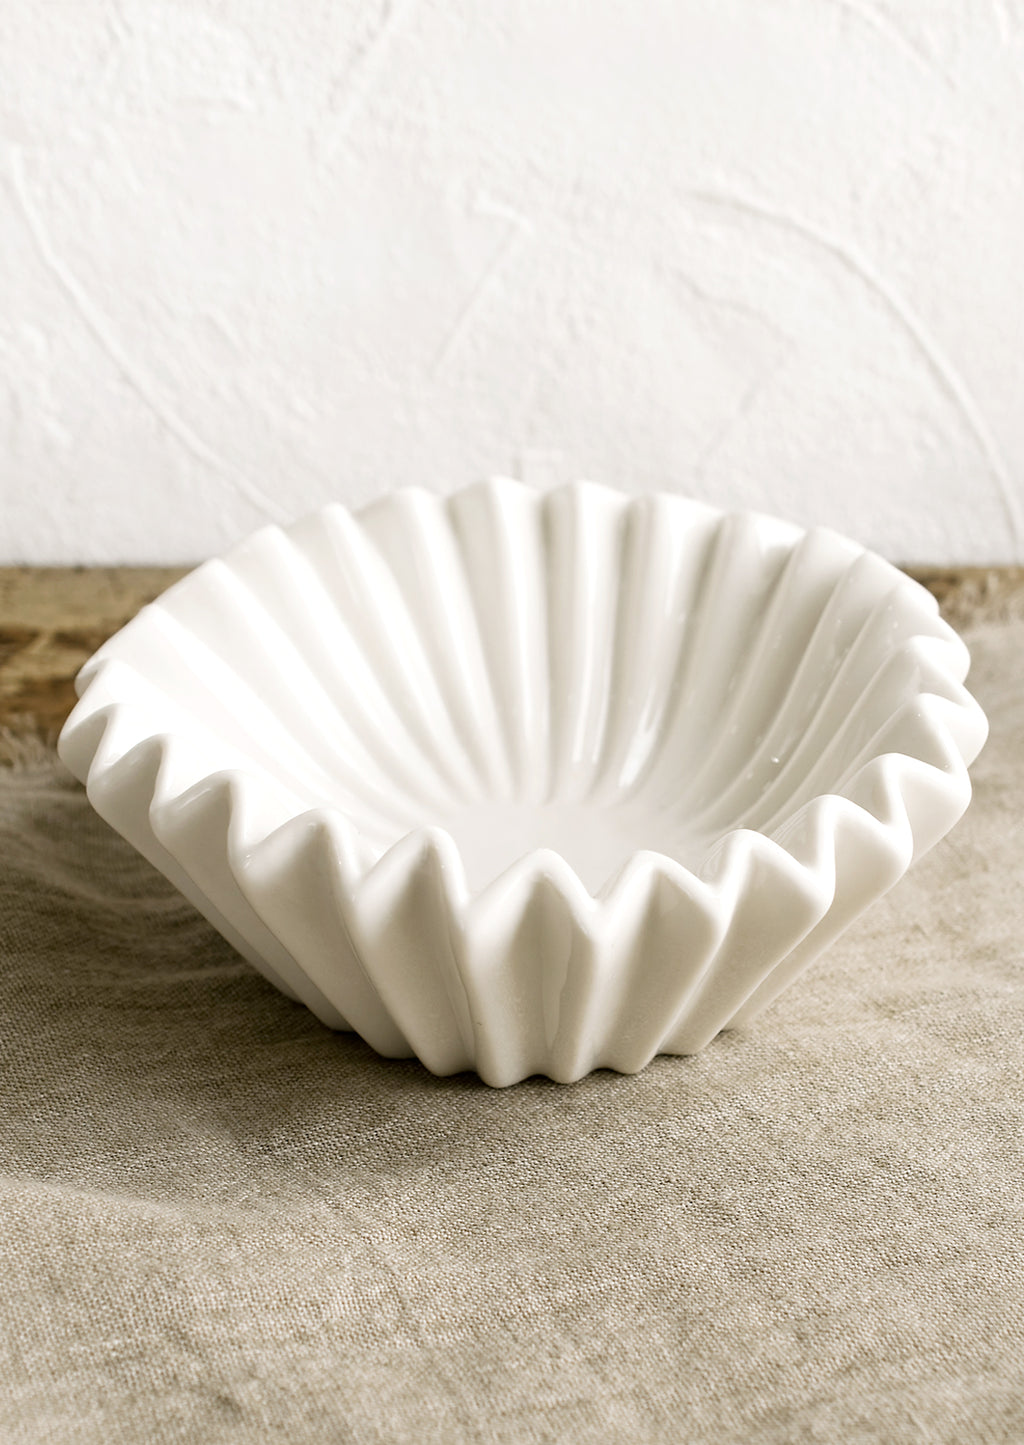 Large: A white bowl with folded/pleated design.